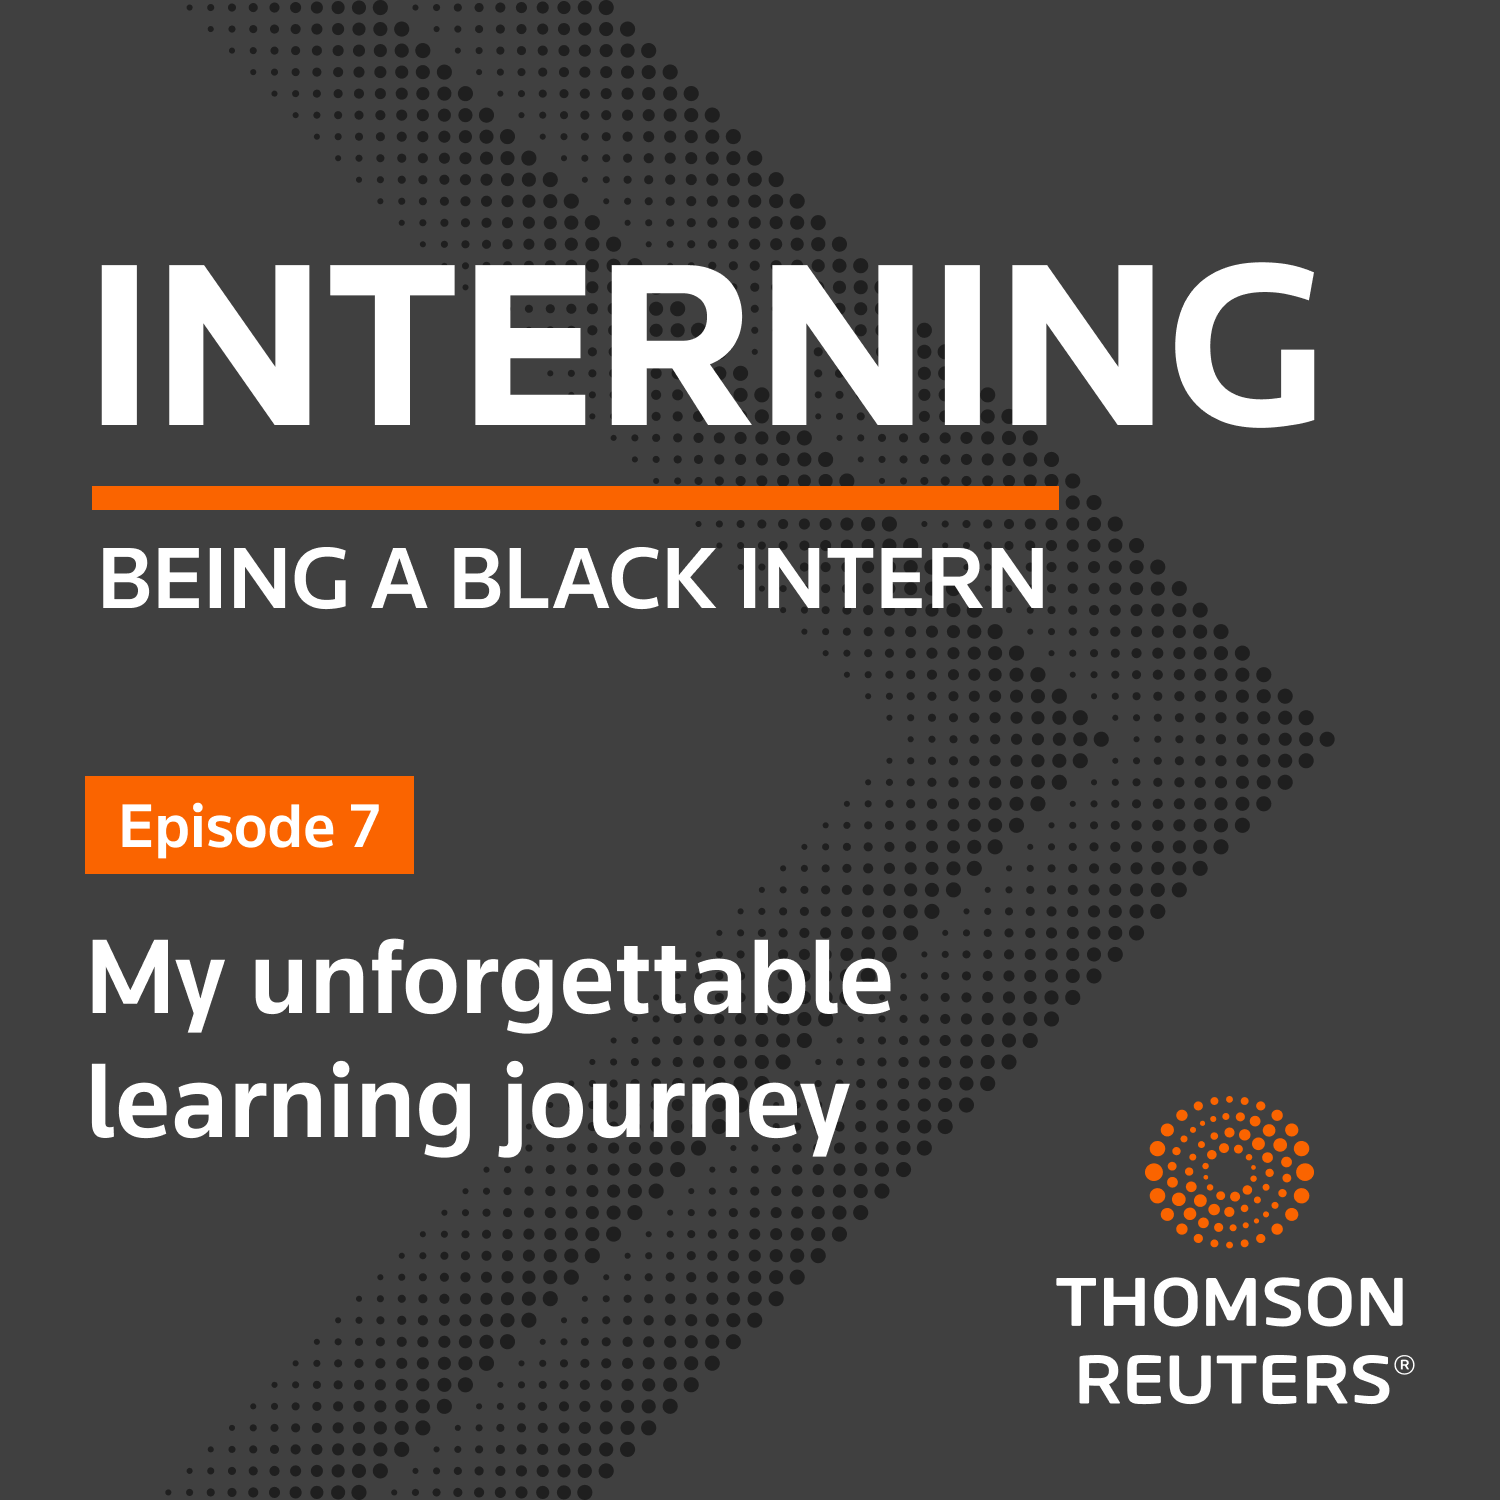 Interning episode 7: My unforgettable learning journey